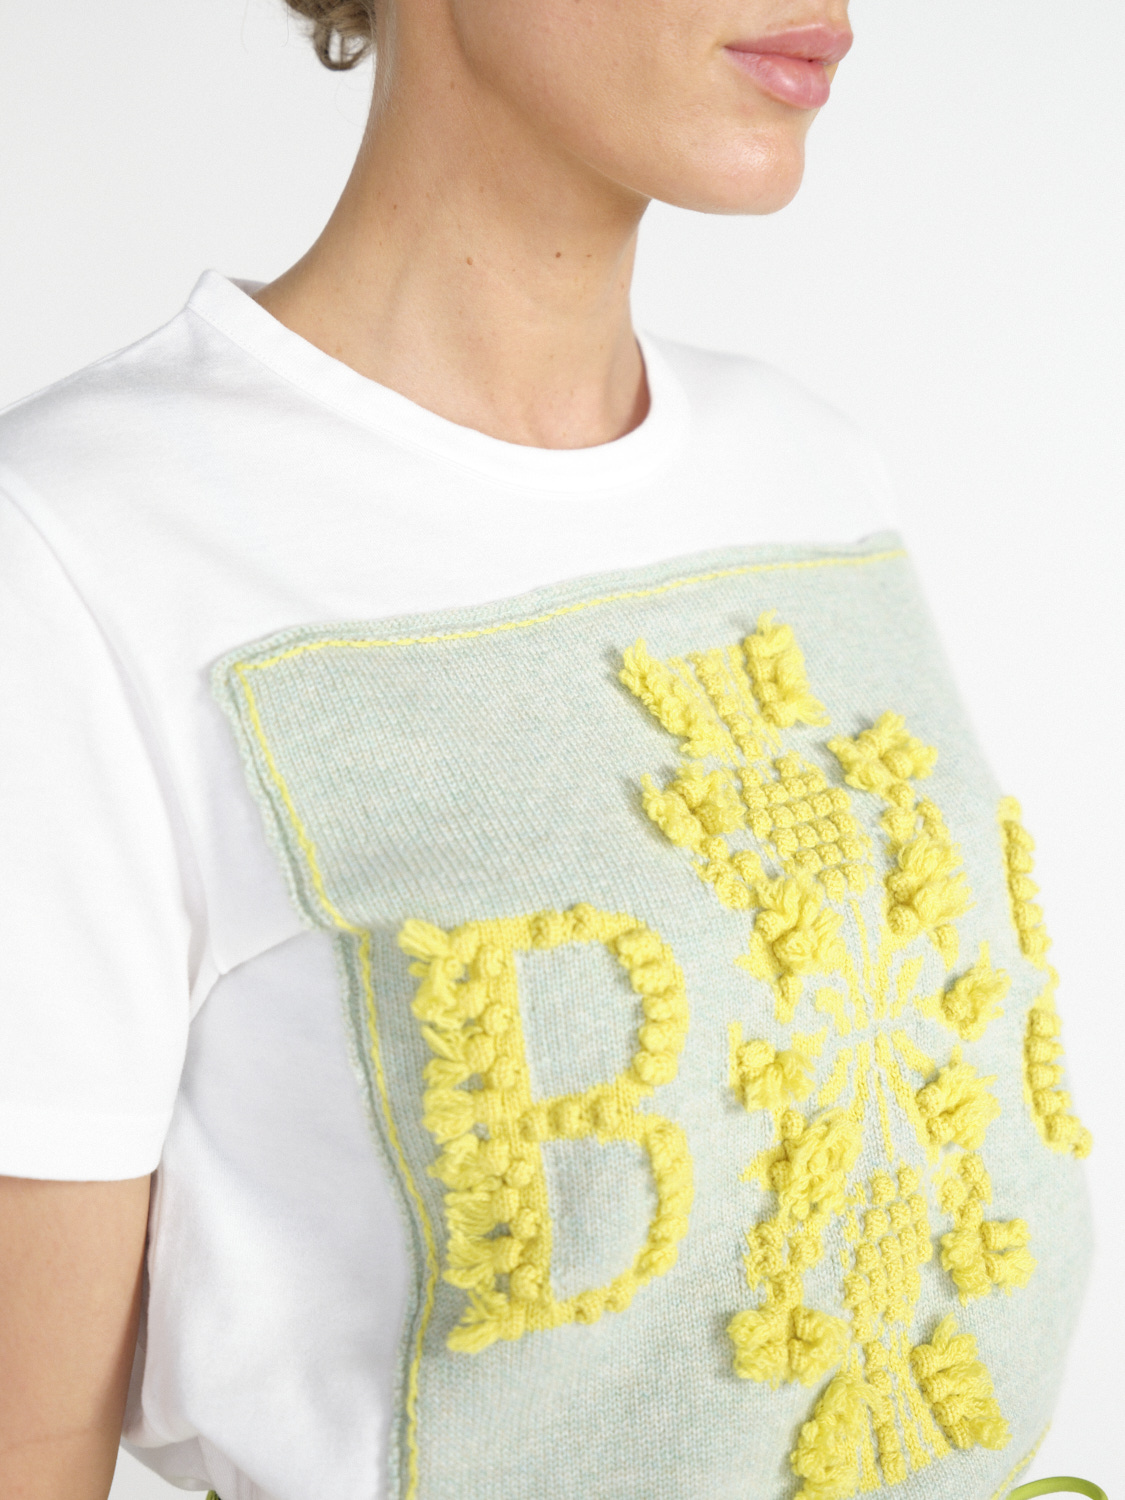 Barrie Thistle Logo Top - T-shirt with cashmere application  hellgrün XS